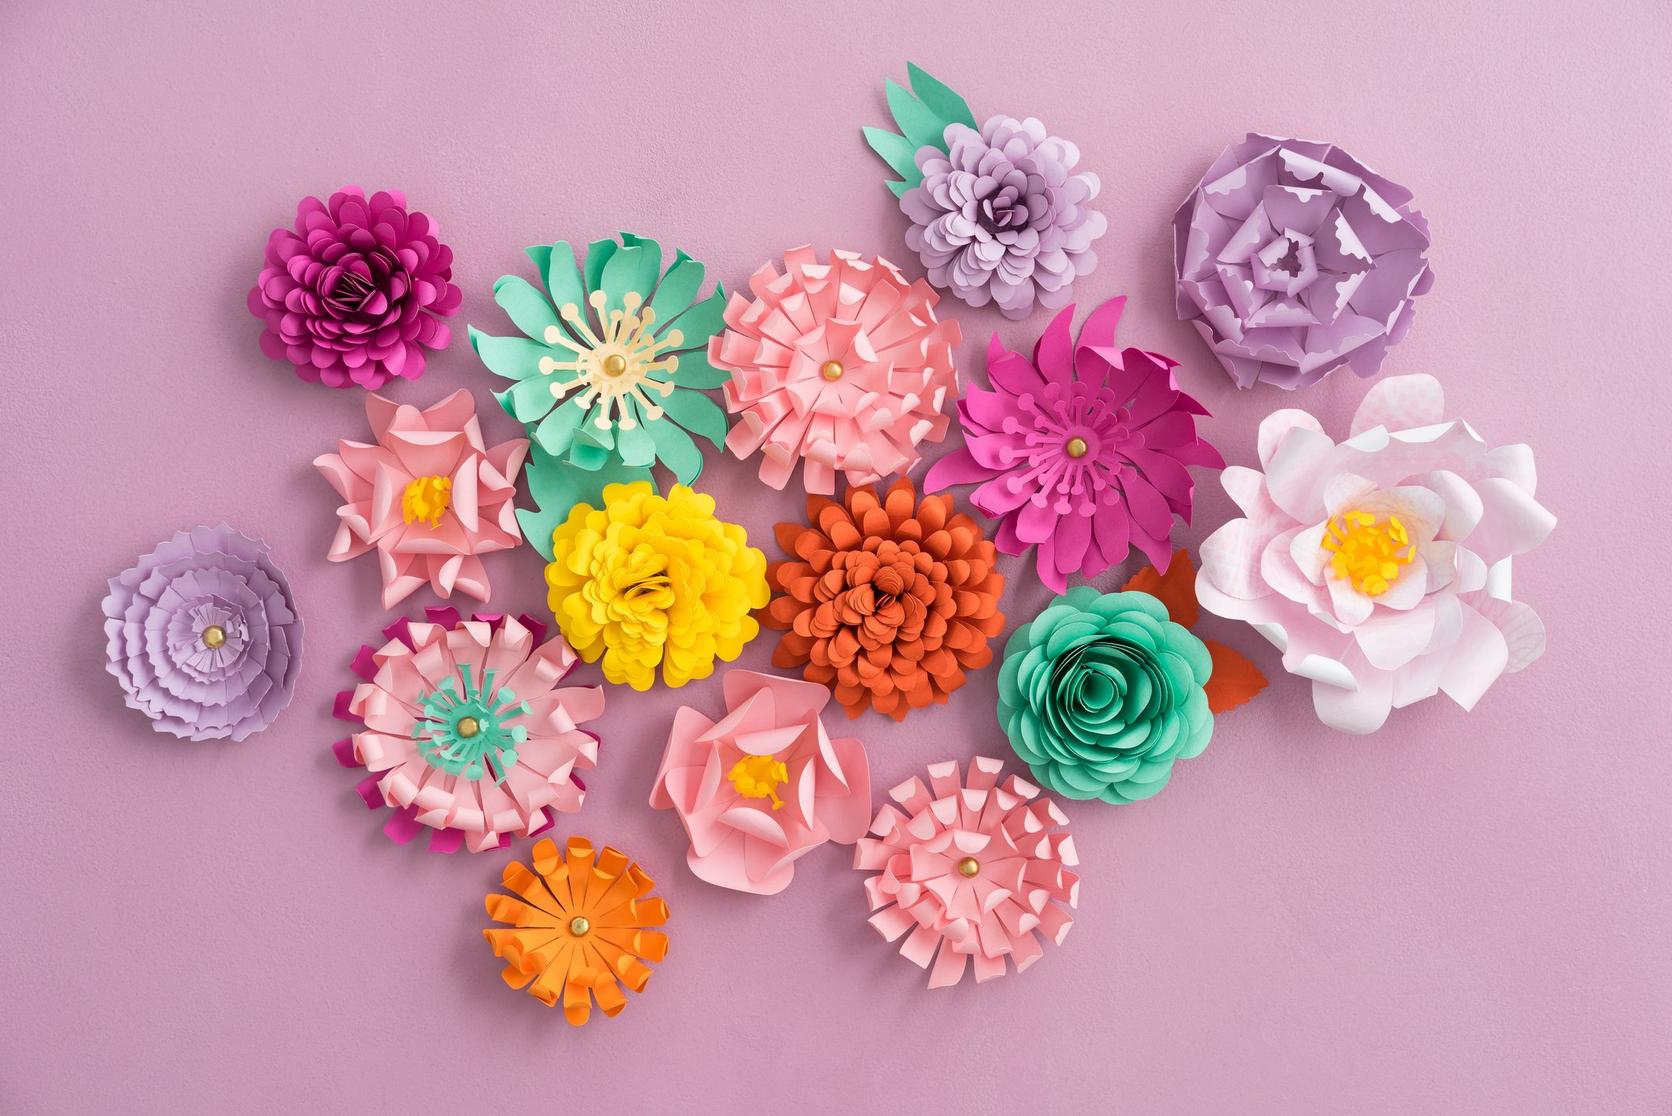 How to Make Flowers with Tissue Paper  Tissue paper flowers diy, Toilet  paper flowers, Paper flowers craft